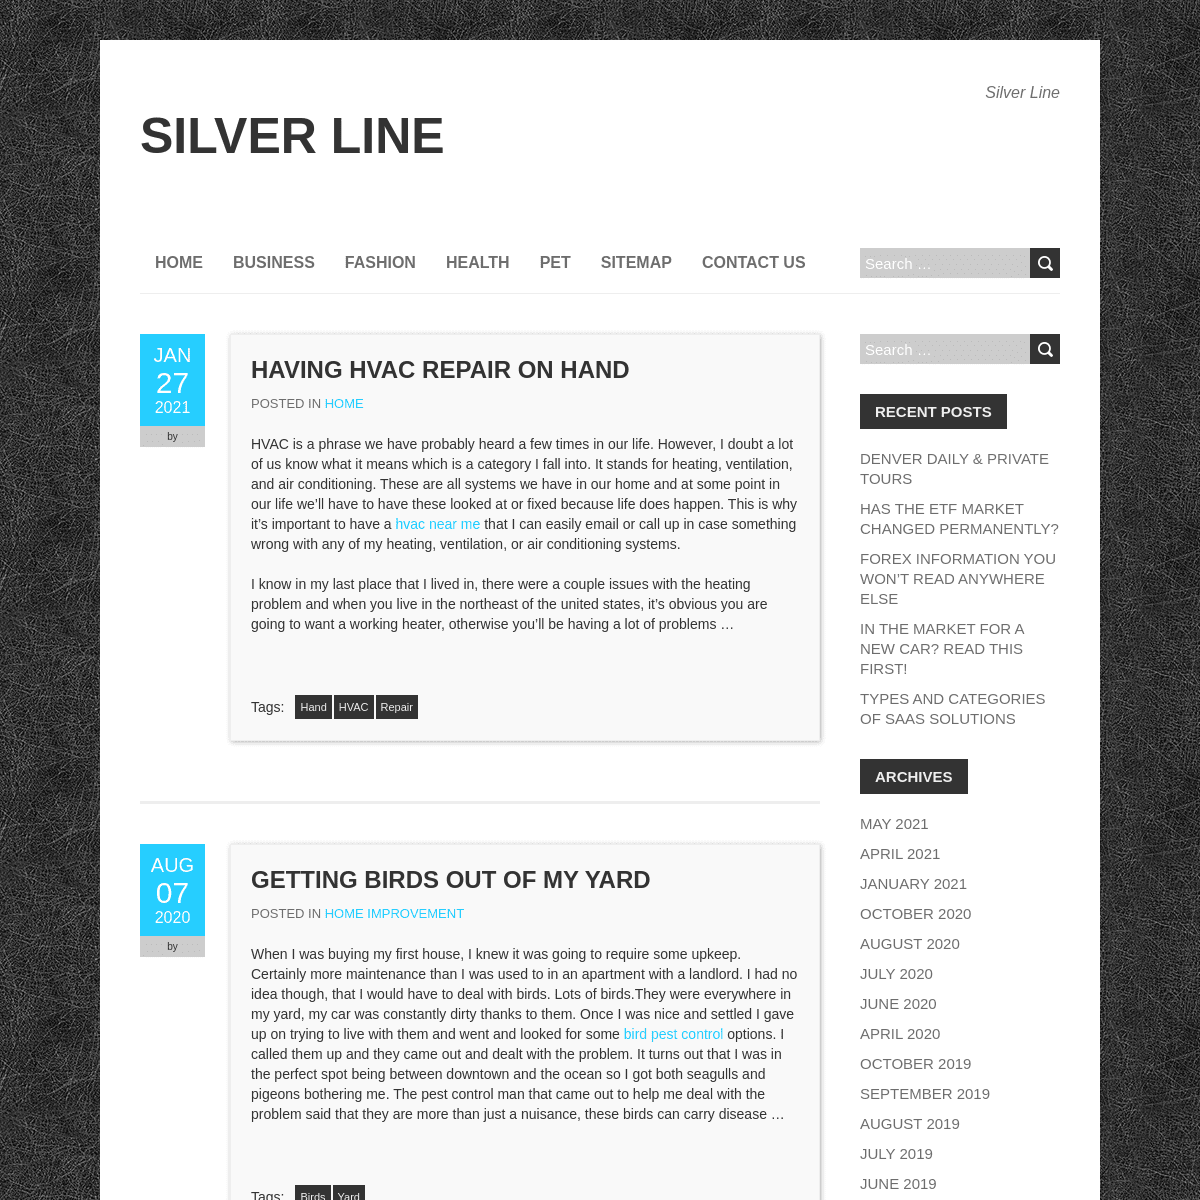 A complete backup of https://silverlinee.com